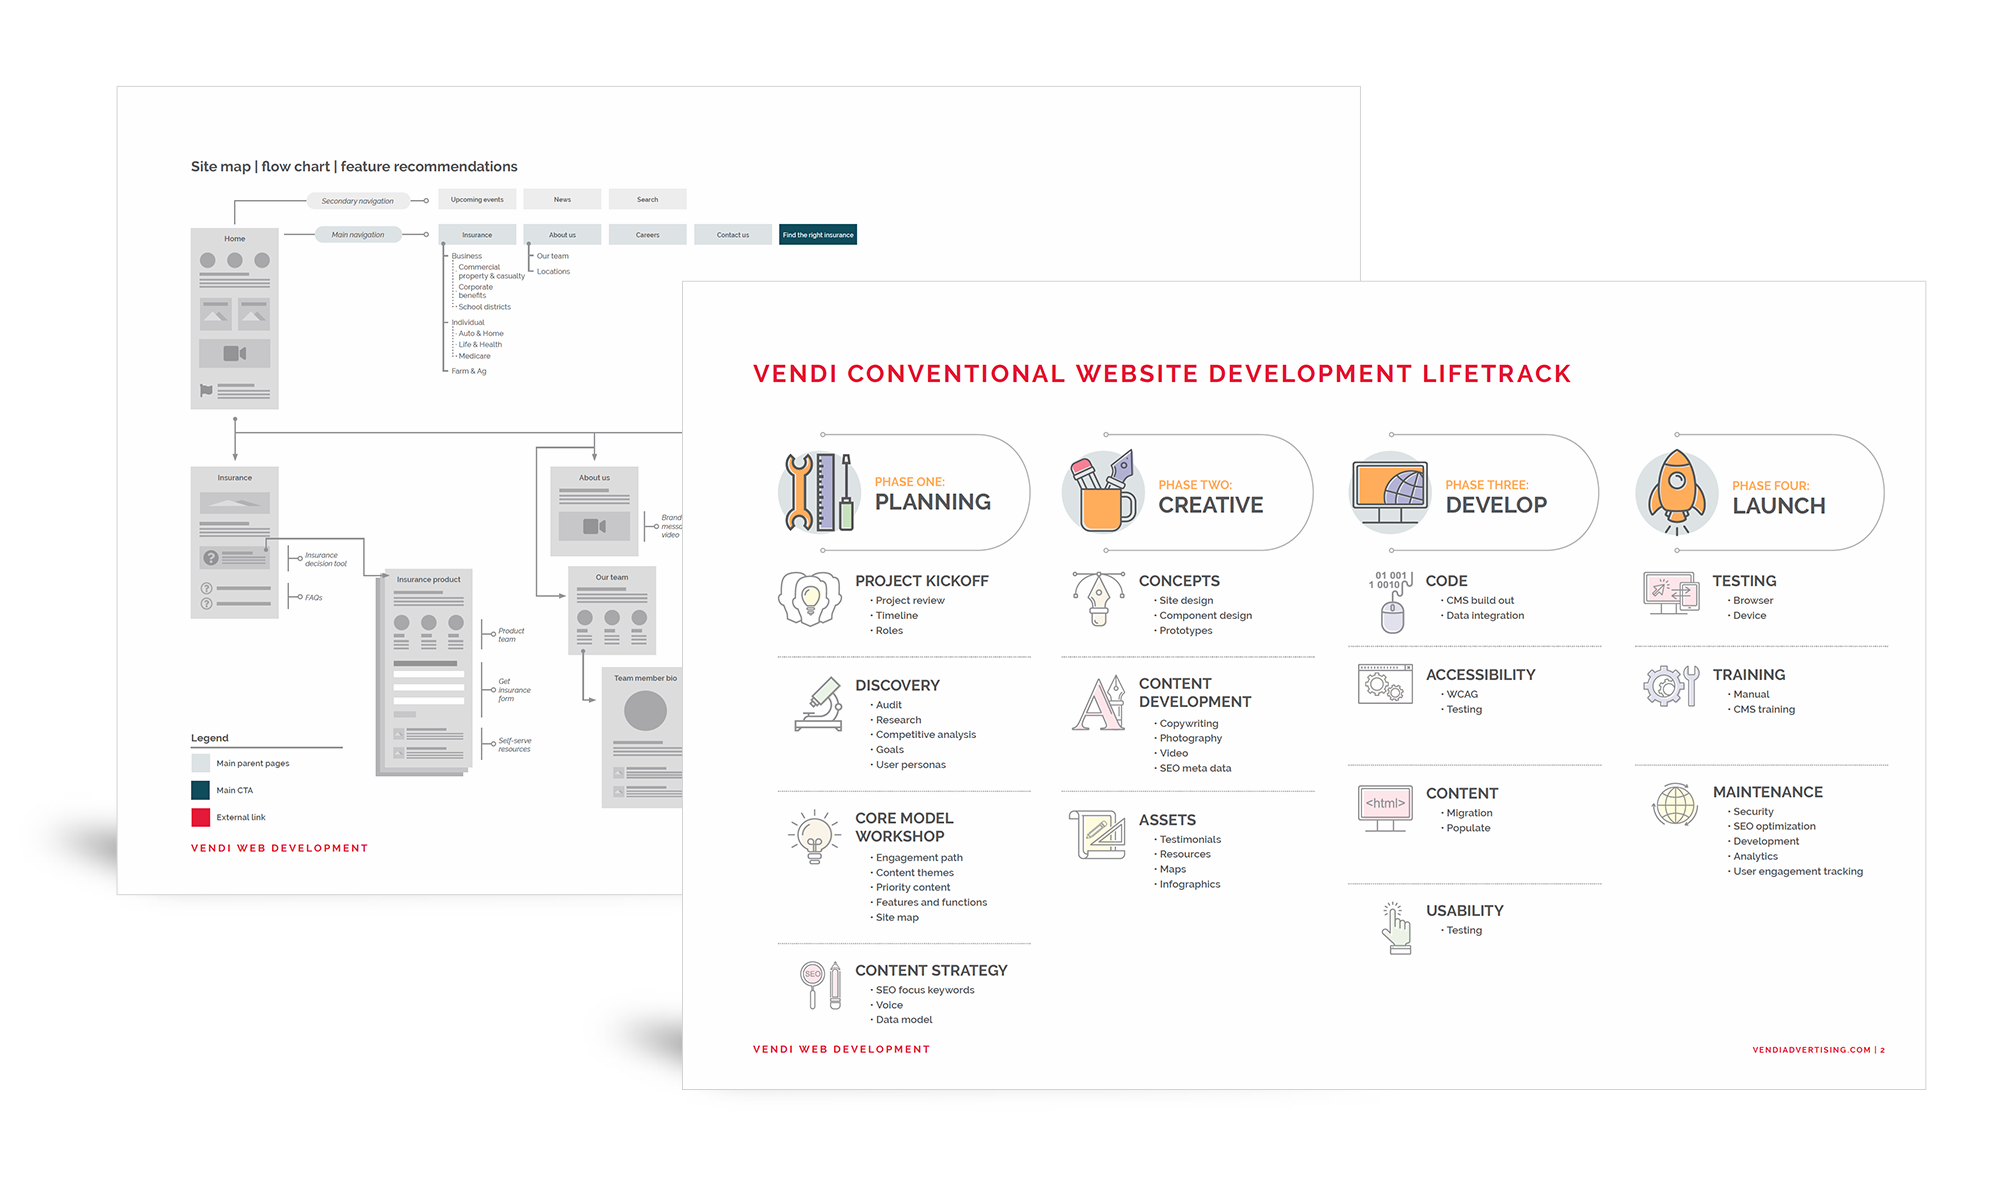 Samples of Vendi’s conventional website content strategy and development lifetrack, and site map flowchart and feature recommendations docs